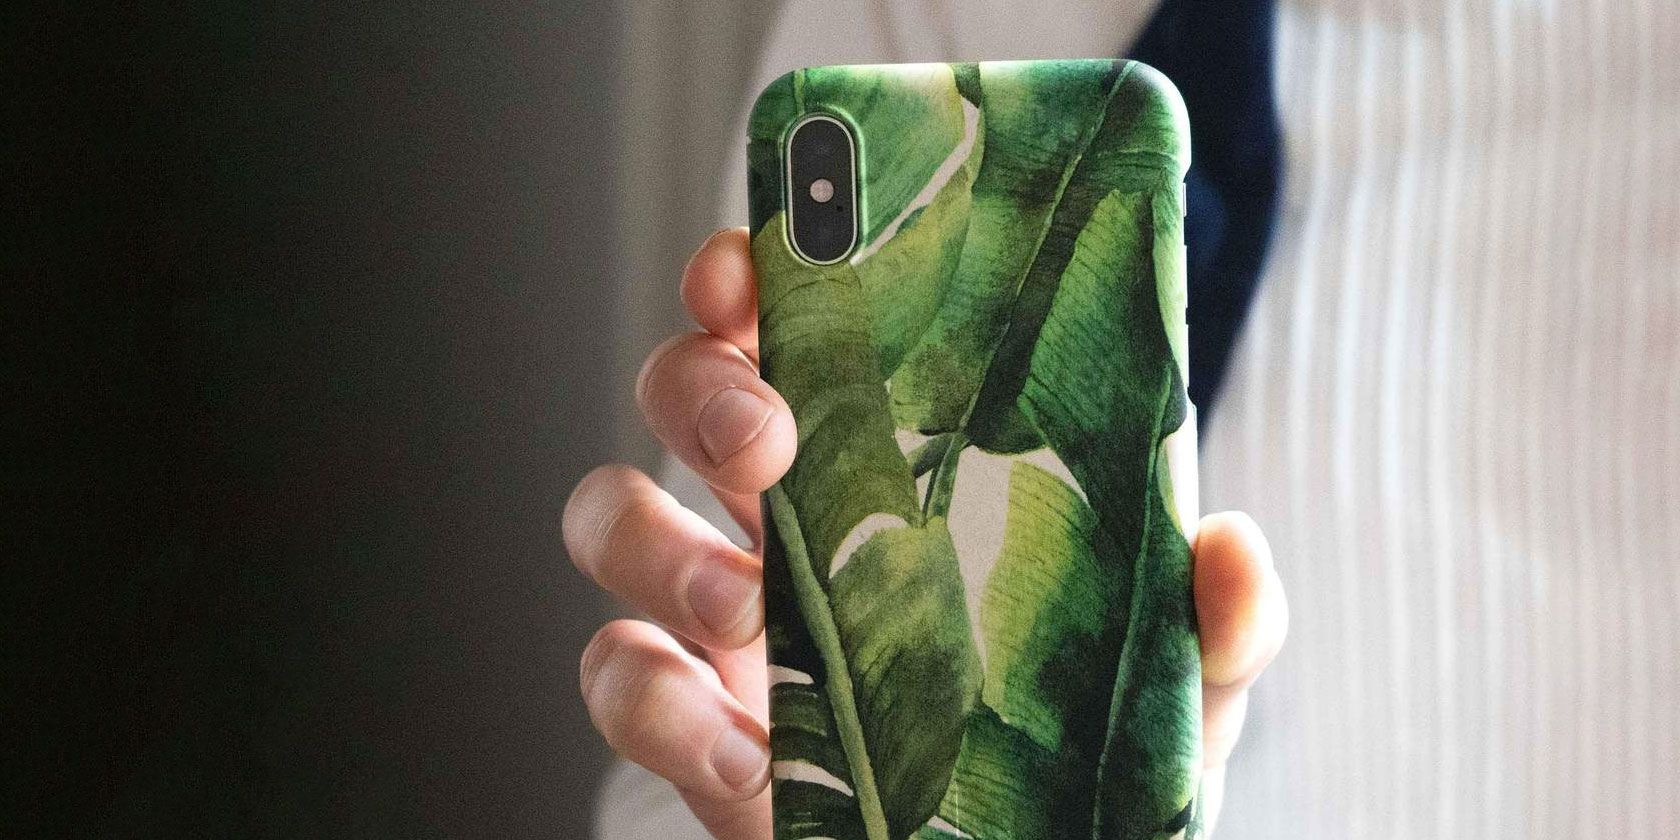 eco friendly phone case being held up in someone's hand